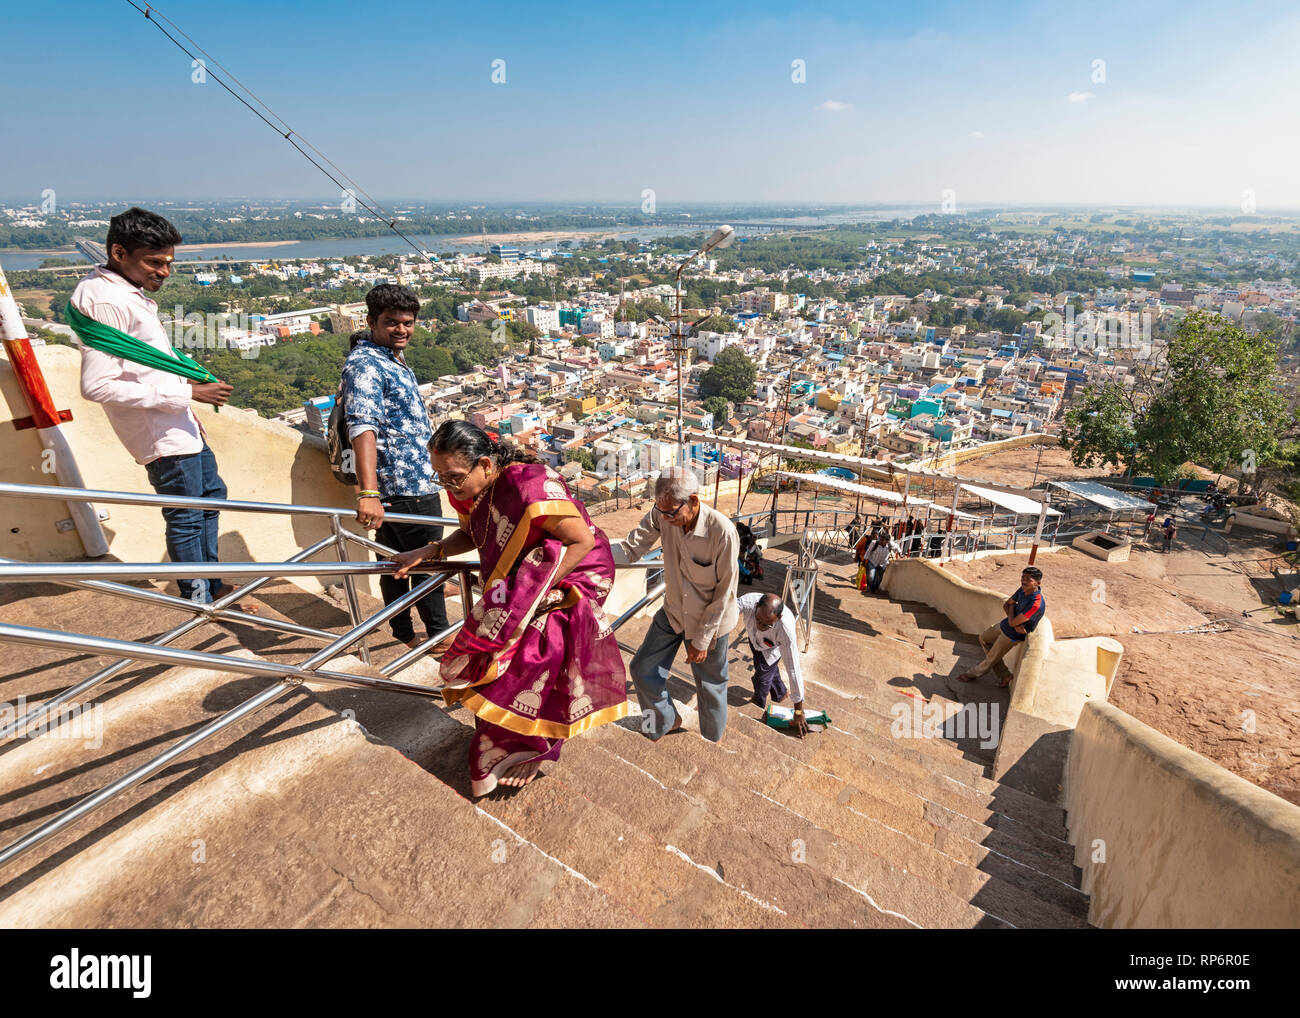 A cityscape view taken from the Rock Fort Temple in Tiruchirappalli or Trichy showing people climbing stairs to the temple. Stock Photo